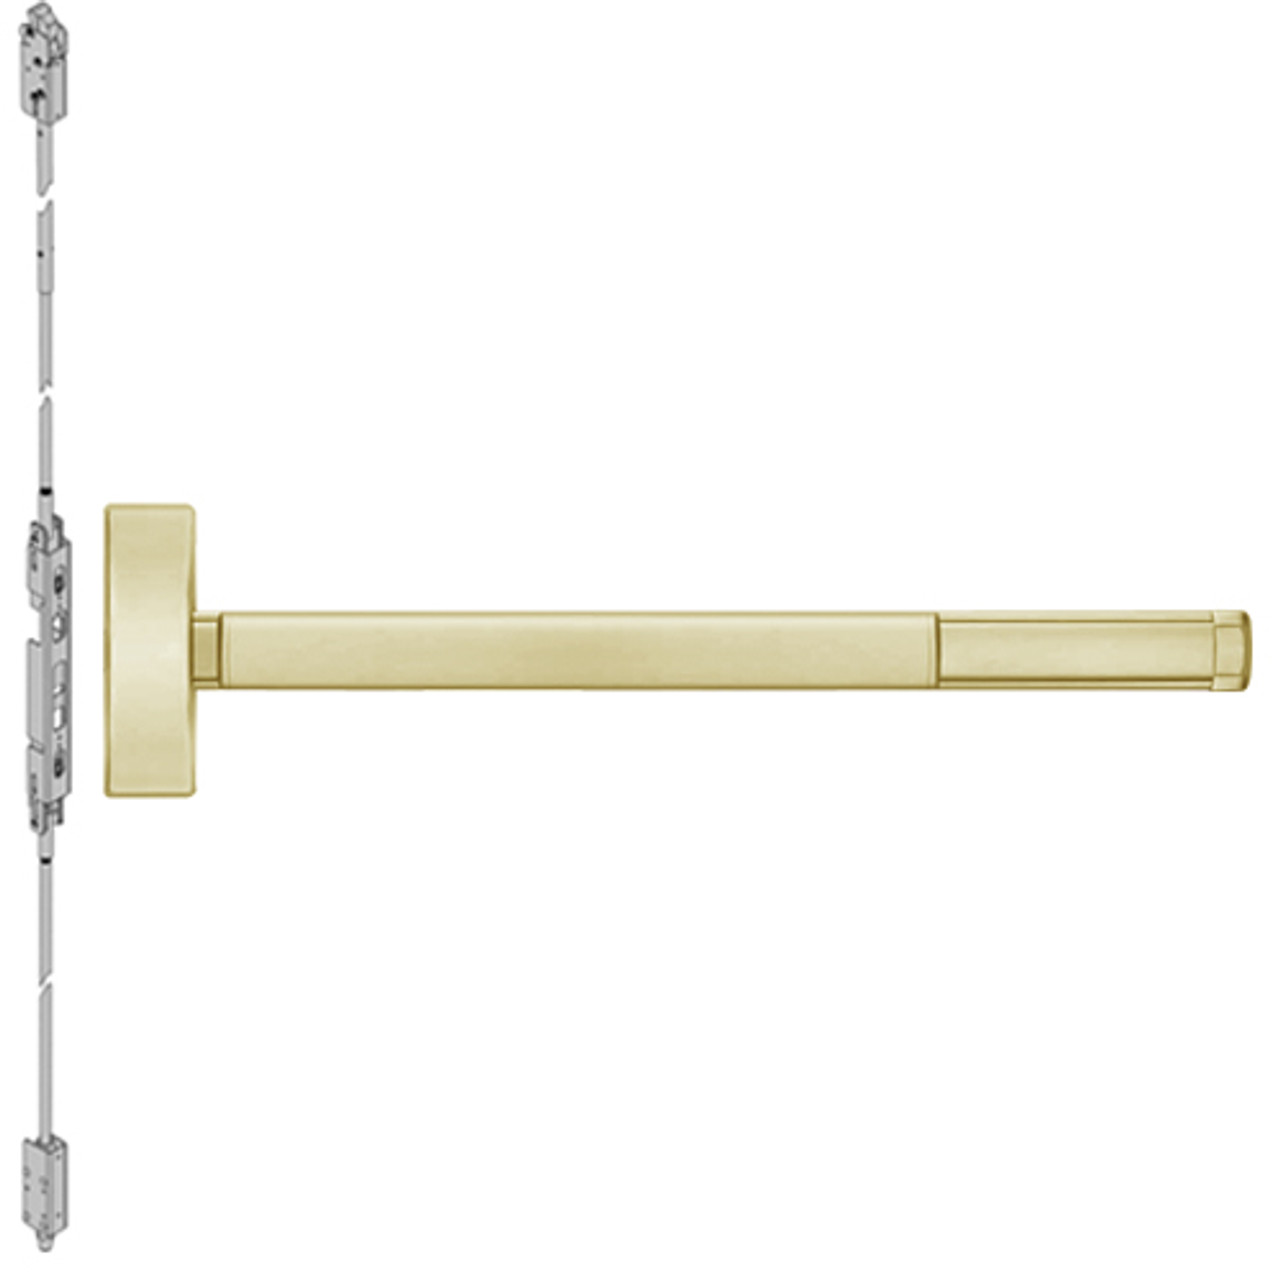 FL2805-606-48 PHI 2800 Series Fire Rated Concealed Vertical Rod Exit Device Prepped for Key Controls Thumb Piece in Satin Brass Finish